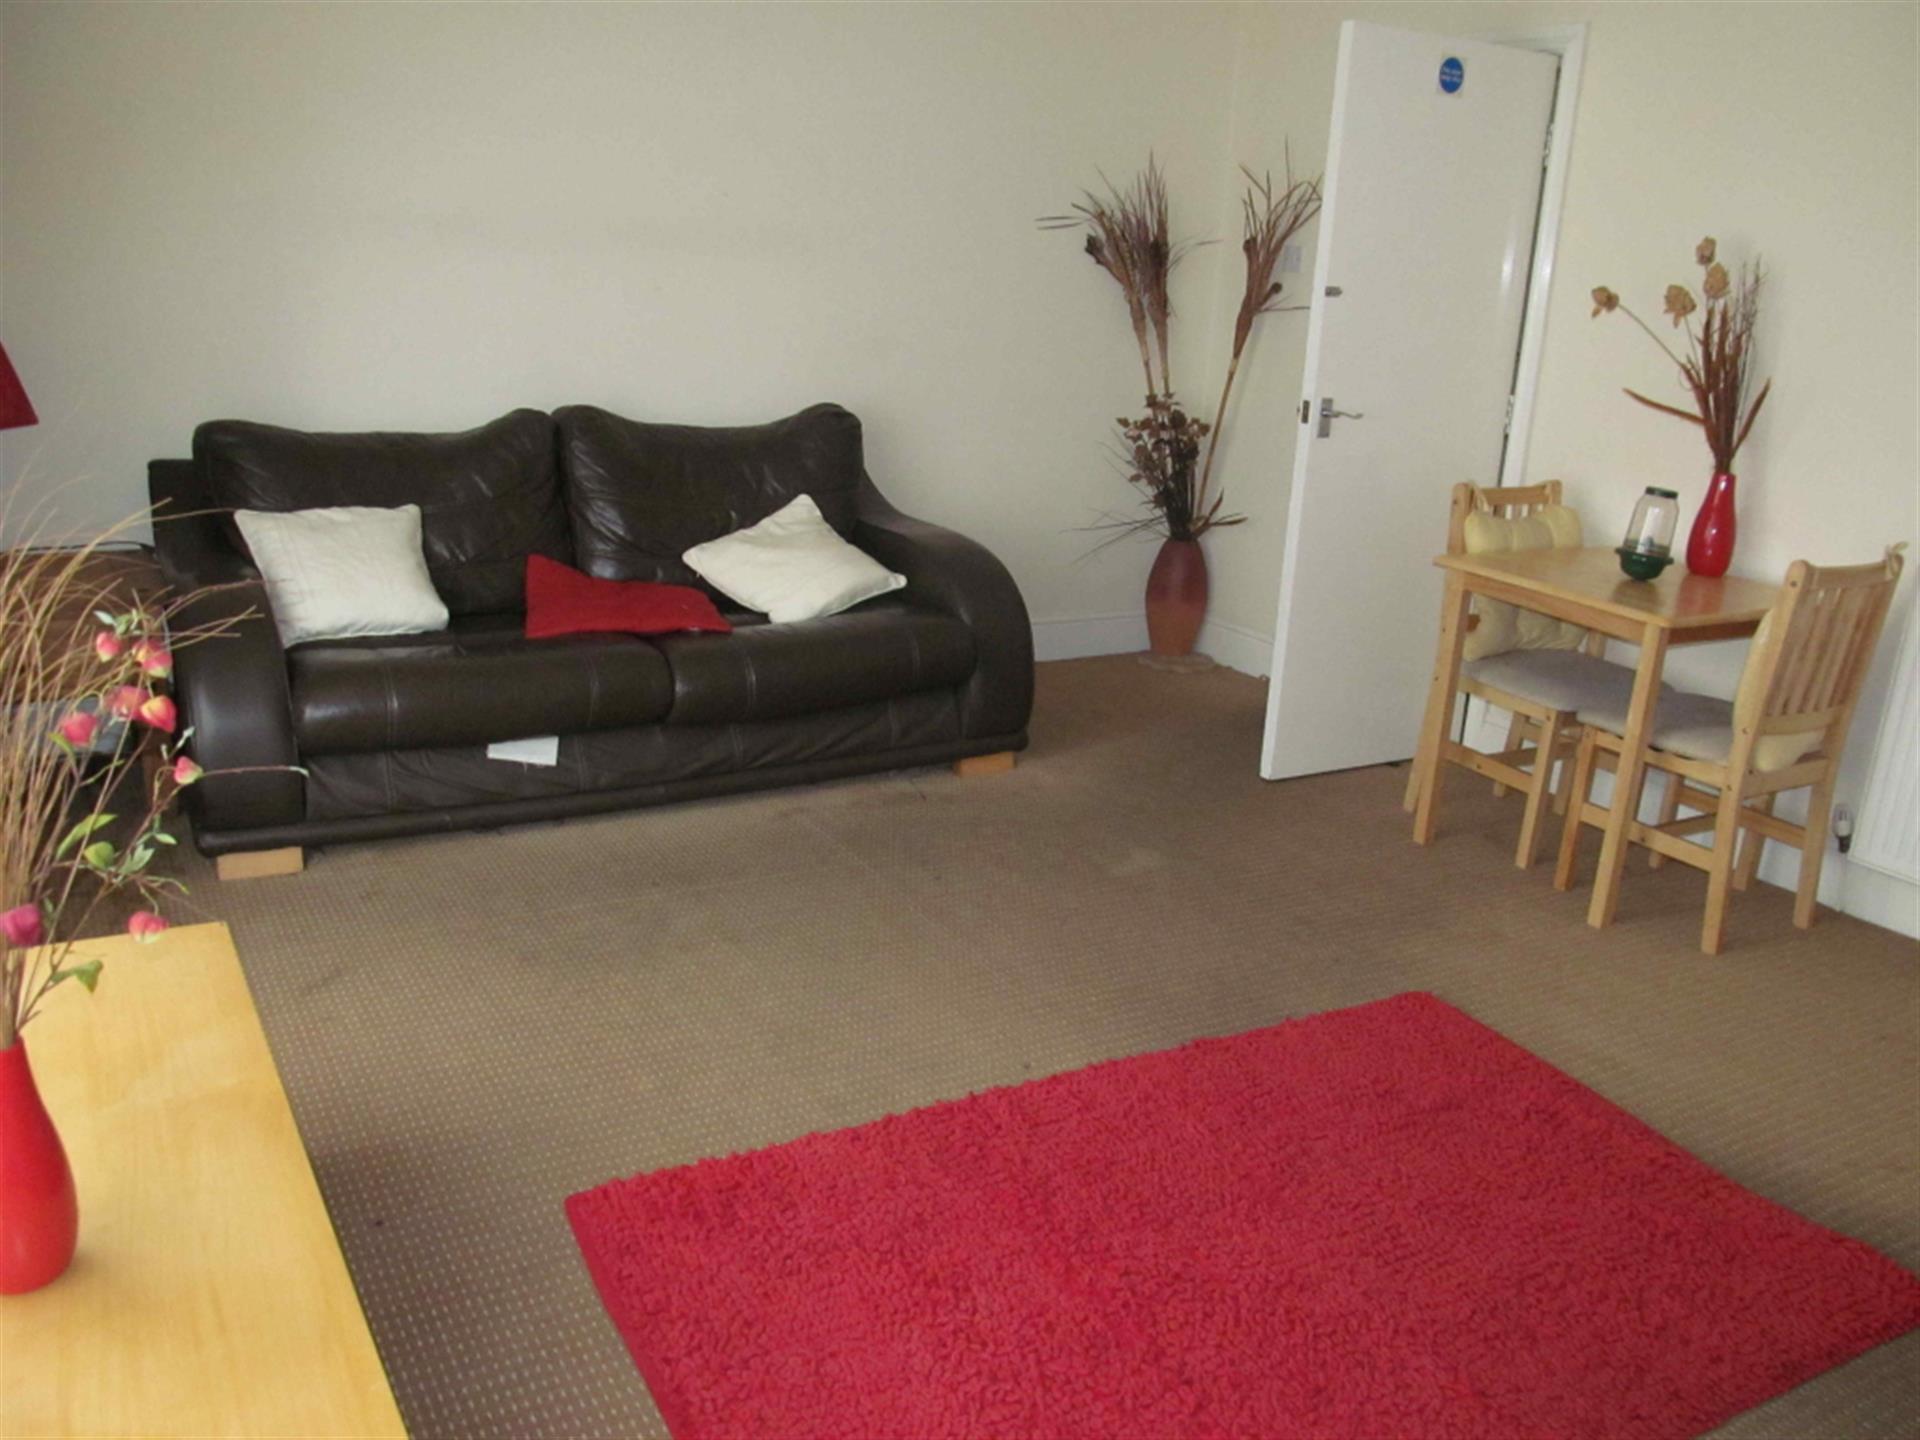 1 bedroom house share house / flat share To Let in Smithills, Bolton, Lancs - Communal Lounge